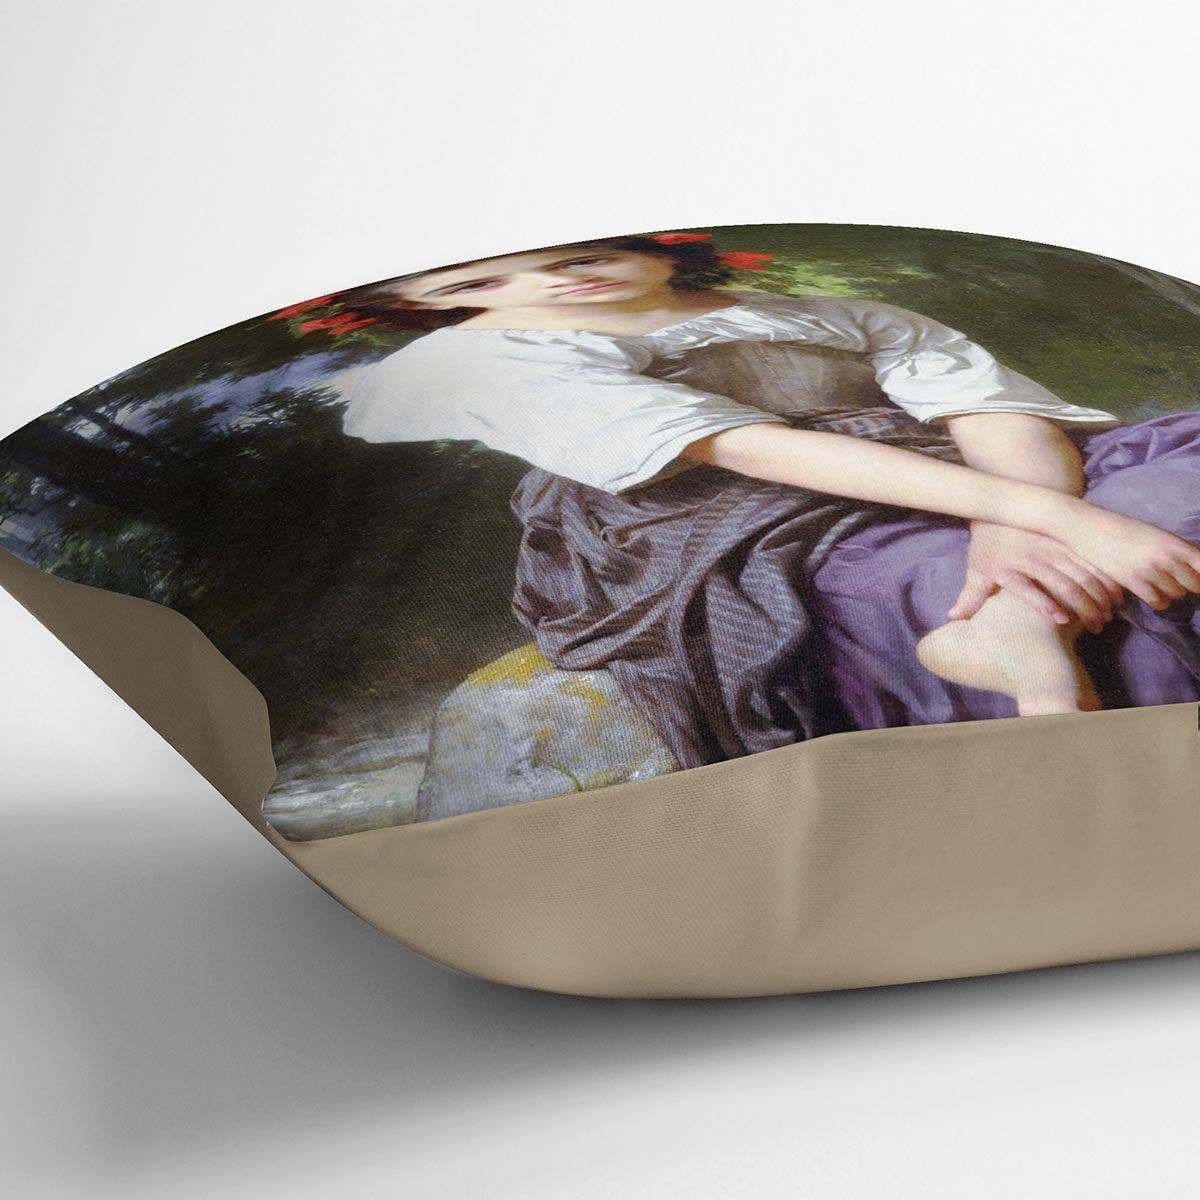 At the Edge of the Brook 2 By Bouguereau Throw Pillow